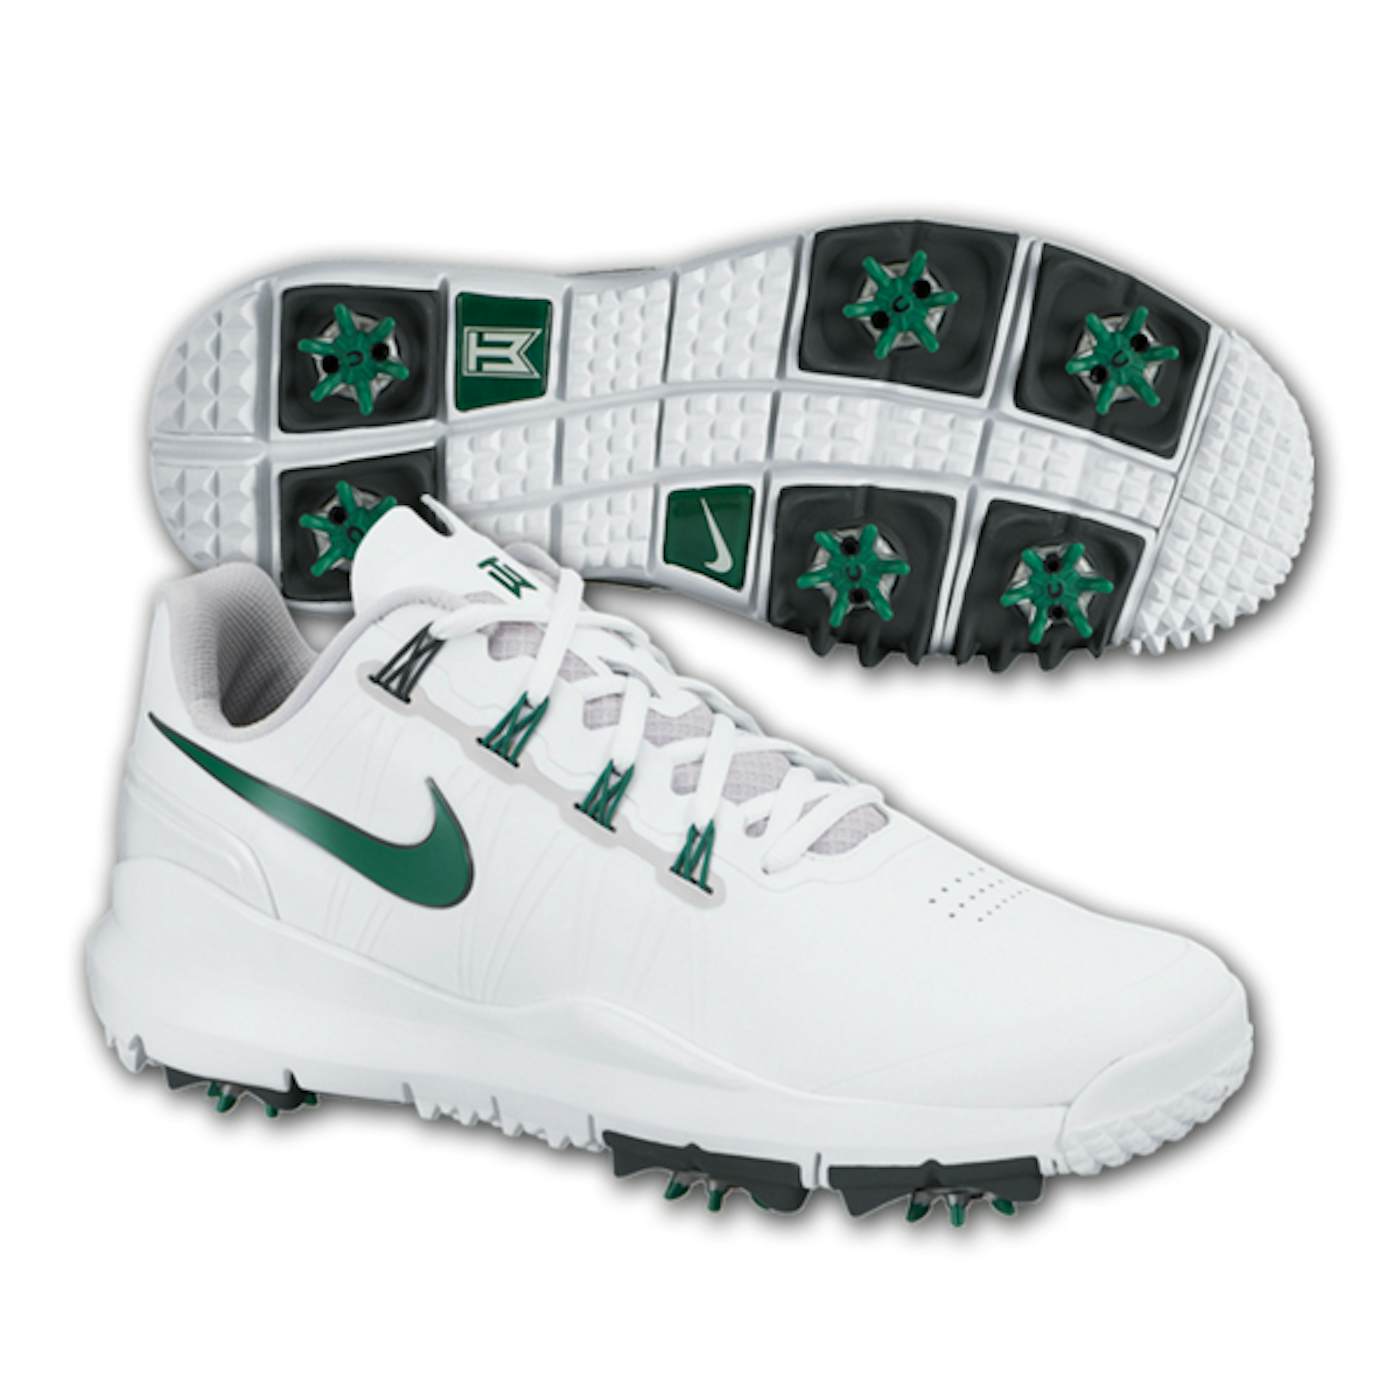 Tiger Woods 2014 Nike Golf Shoes: Special Edition